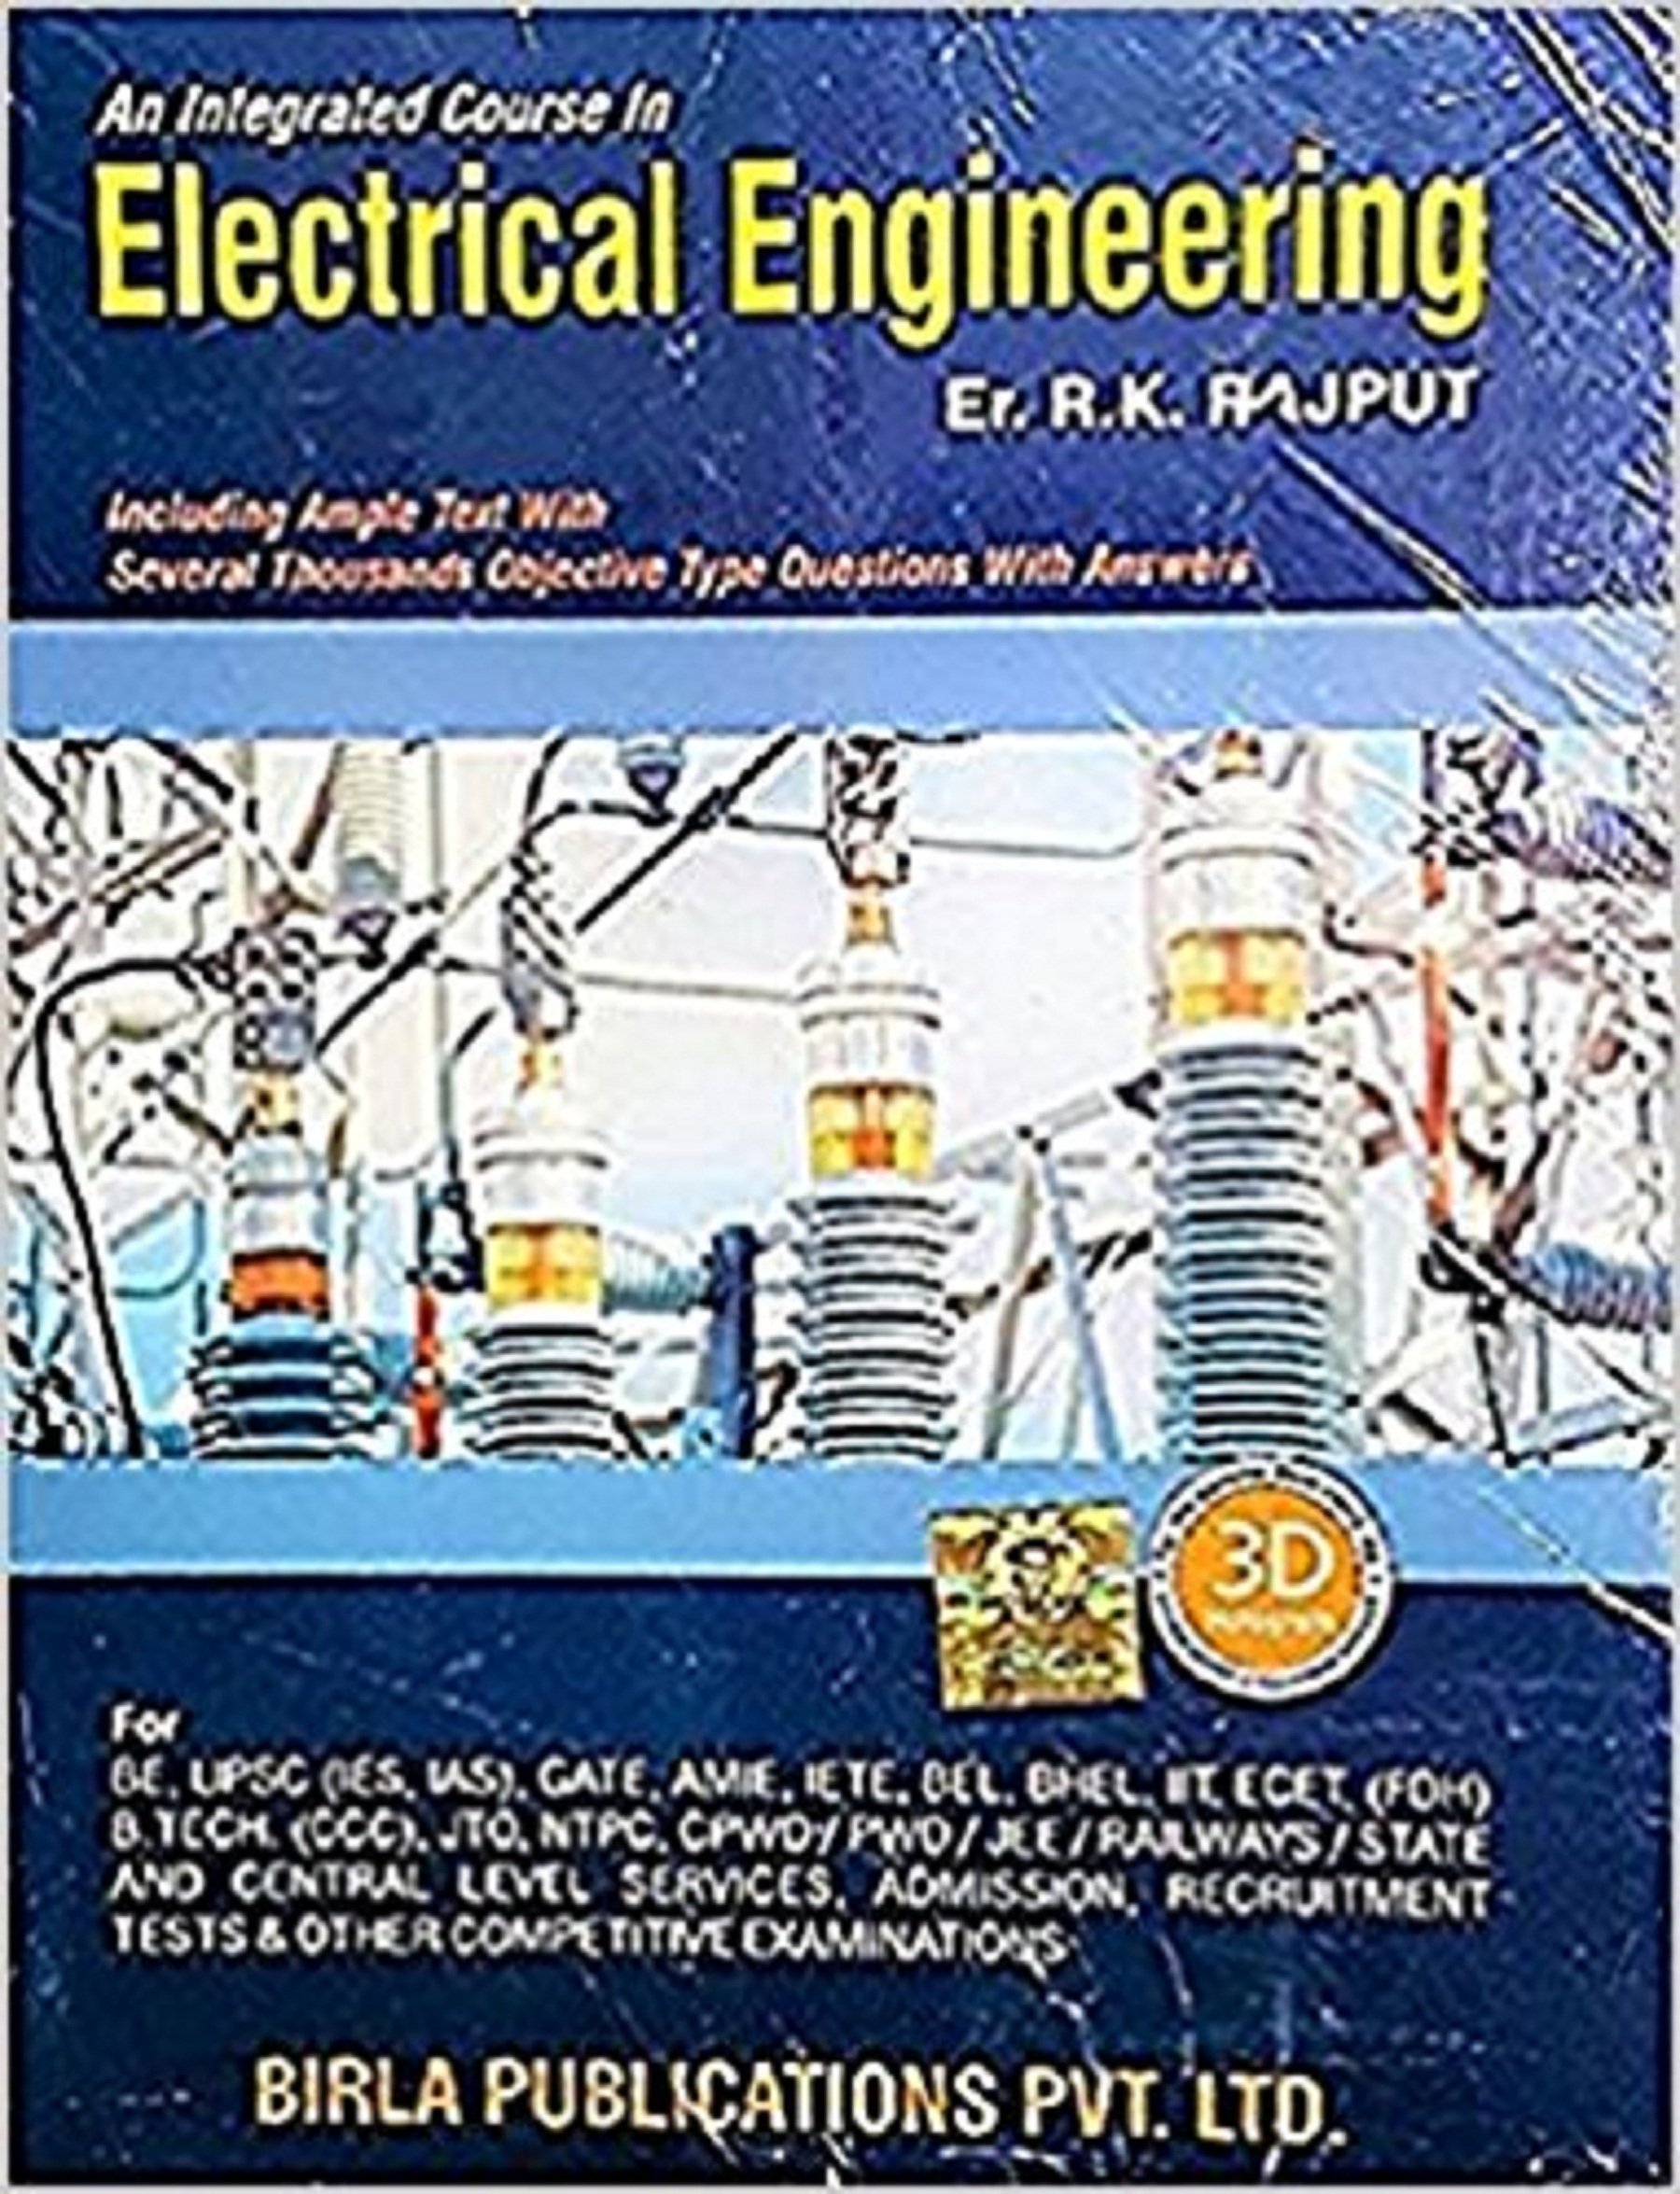 Best objective mcq book for electronic engineering pdf 2017